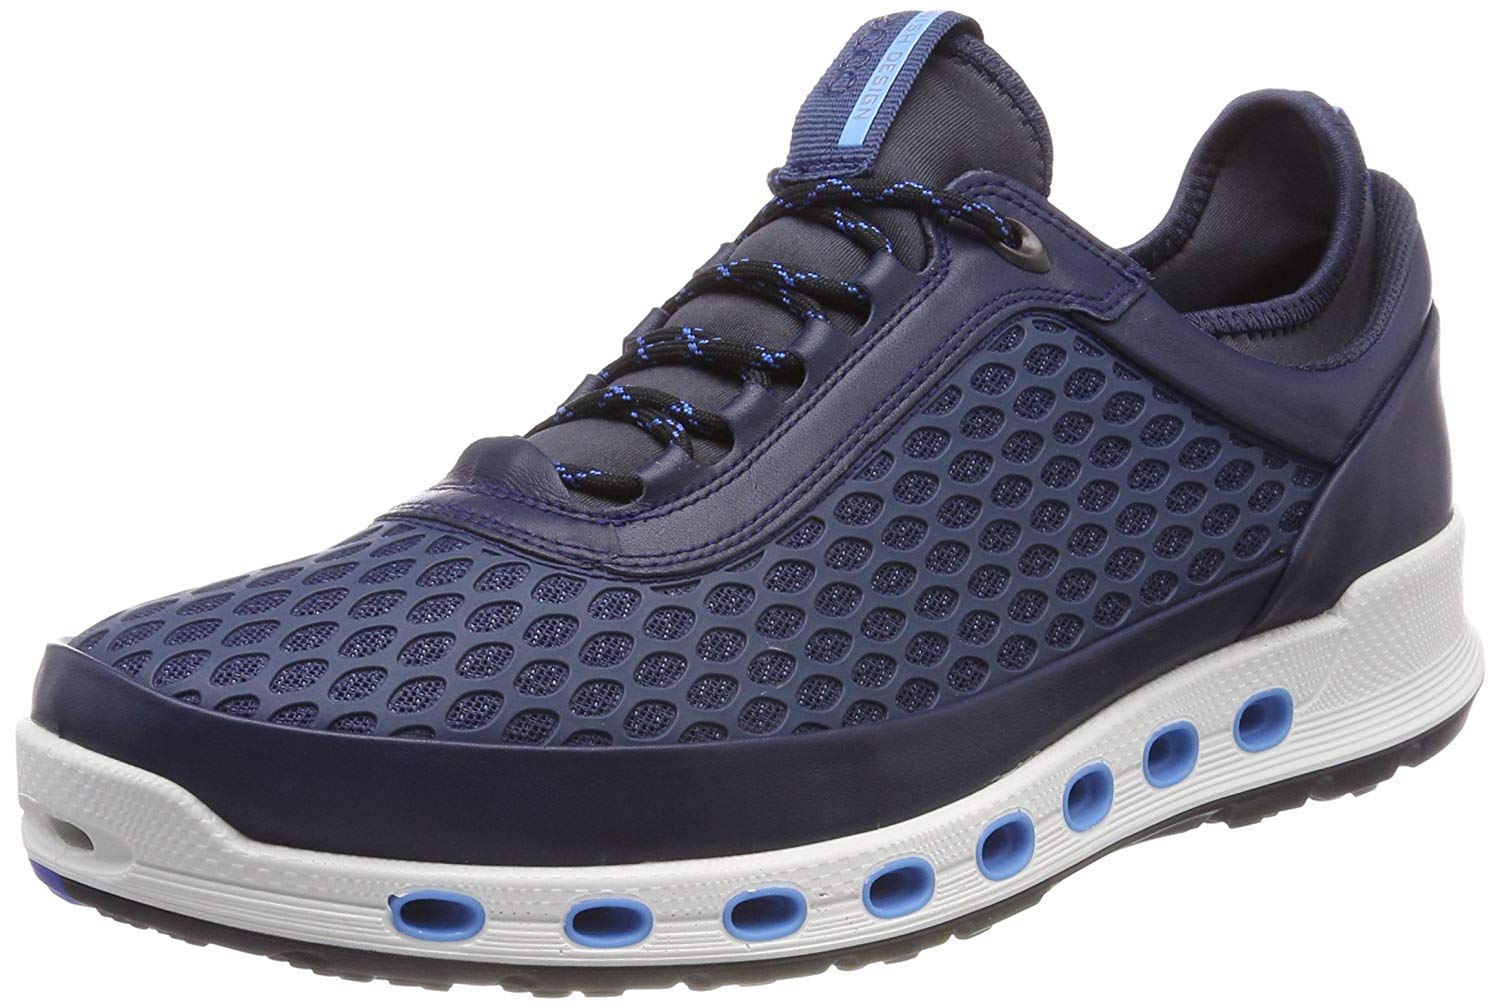 Illusion instinkt Uplifted ECCO Cool 2.0 Reviewed for Performance in 2022 | WalkJogRun